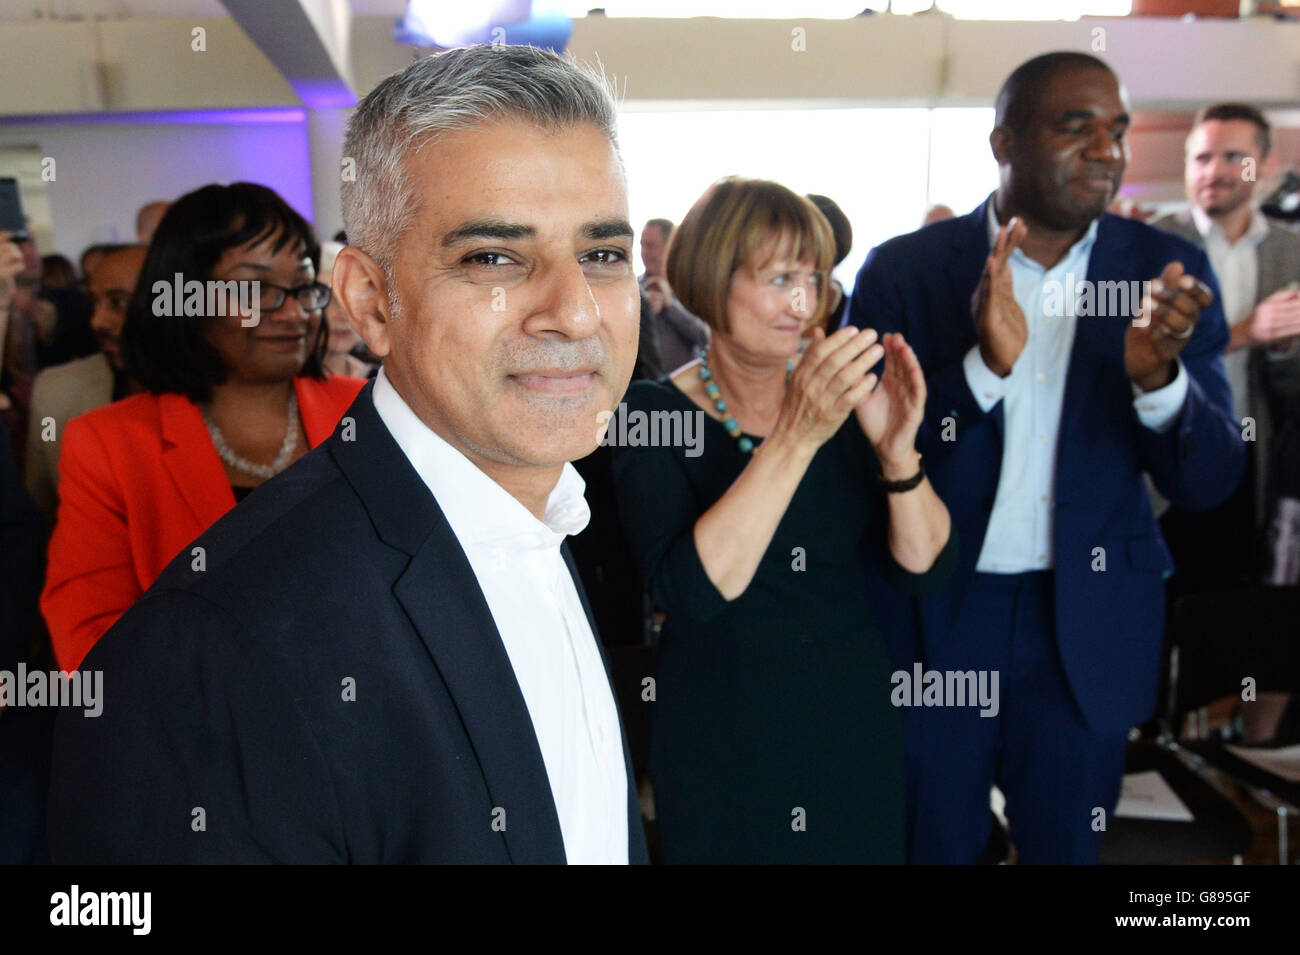 Sadiq Khan MP is congratulated by Diane Abbott (left), Tessa Jowell, and David Lammy (right) after it was announced that he has been chosen as the Labour candidate to run for London mayor in 2016. Stock Photo